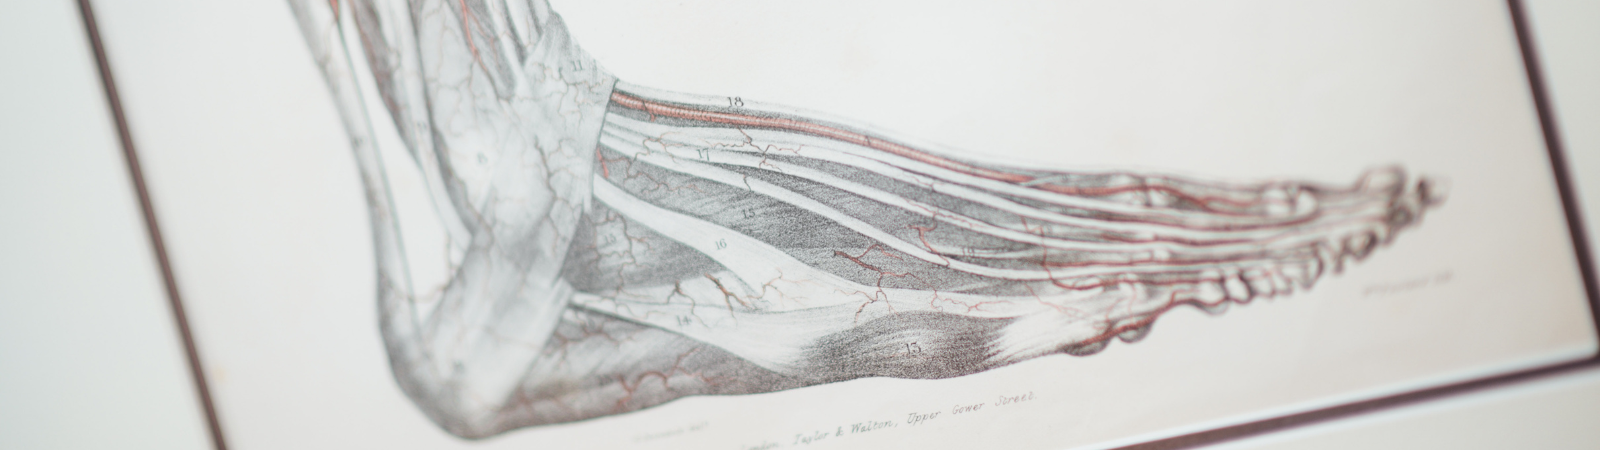 Close up of anatomical drawing of the human foot